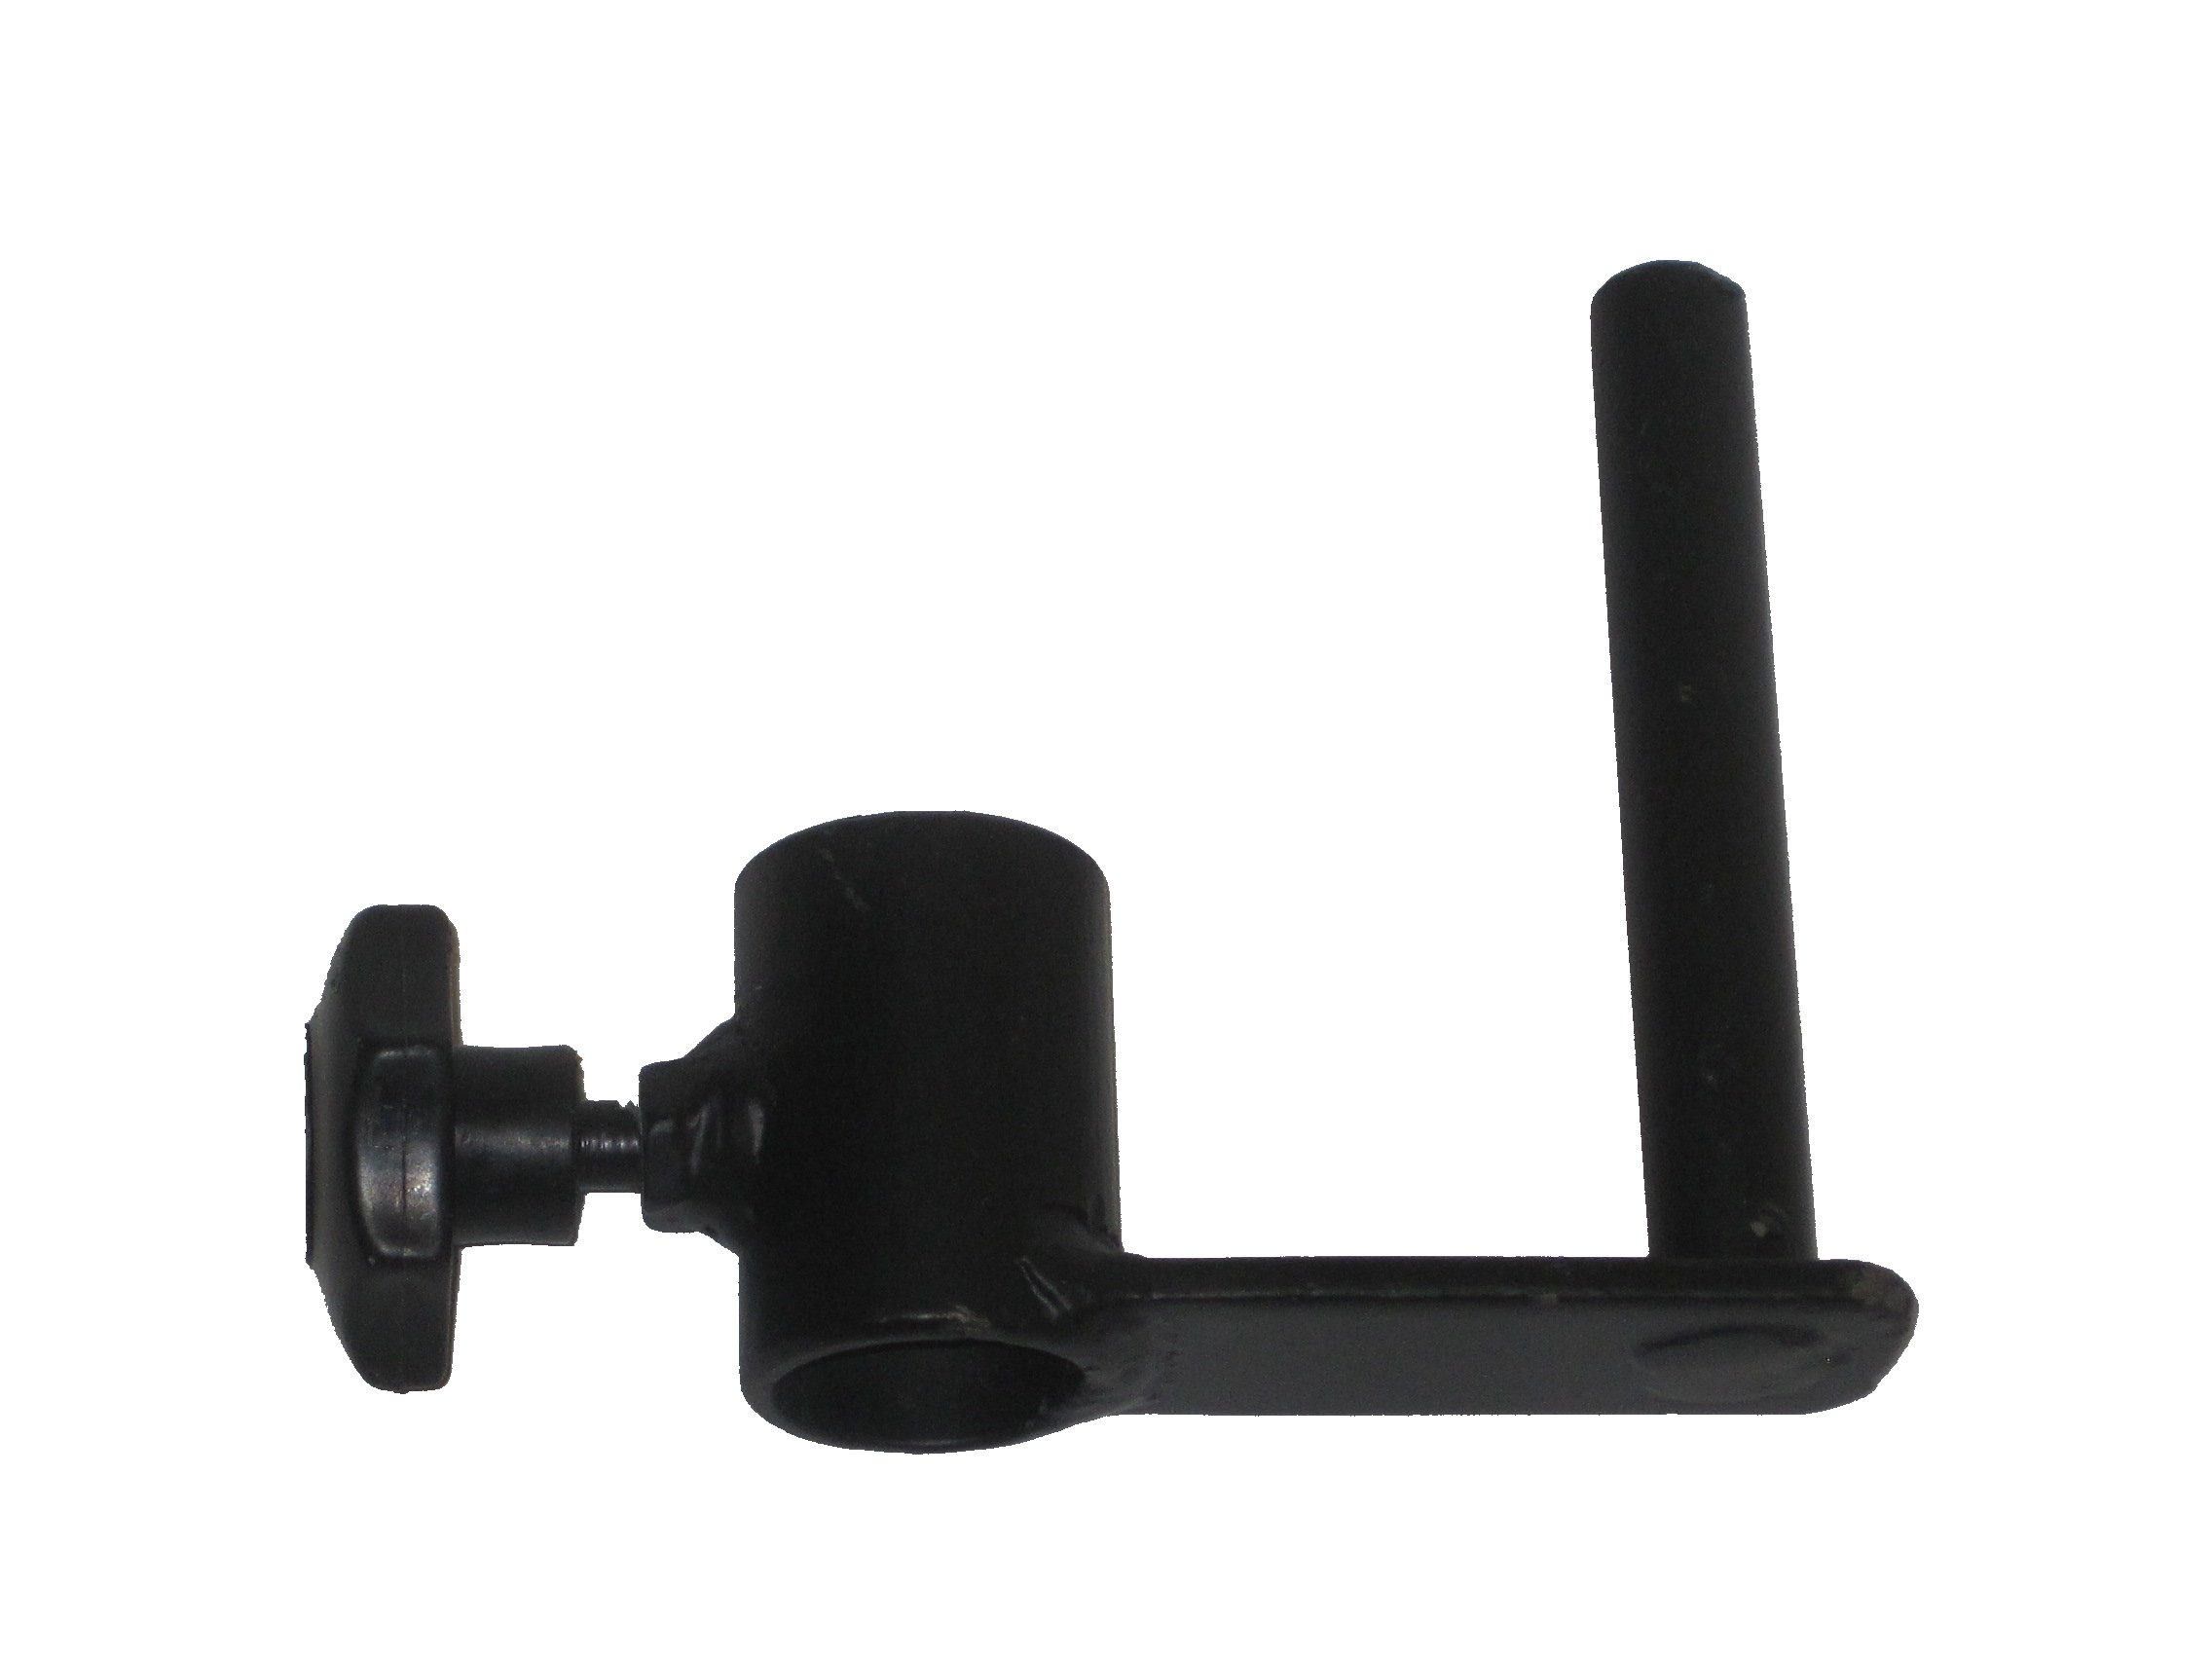 EXTRA Tripod Bracket for HLP1000 and VLP1000 Paint Dryer